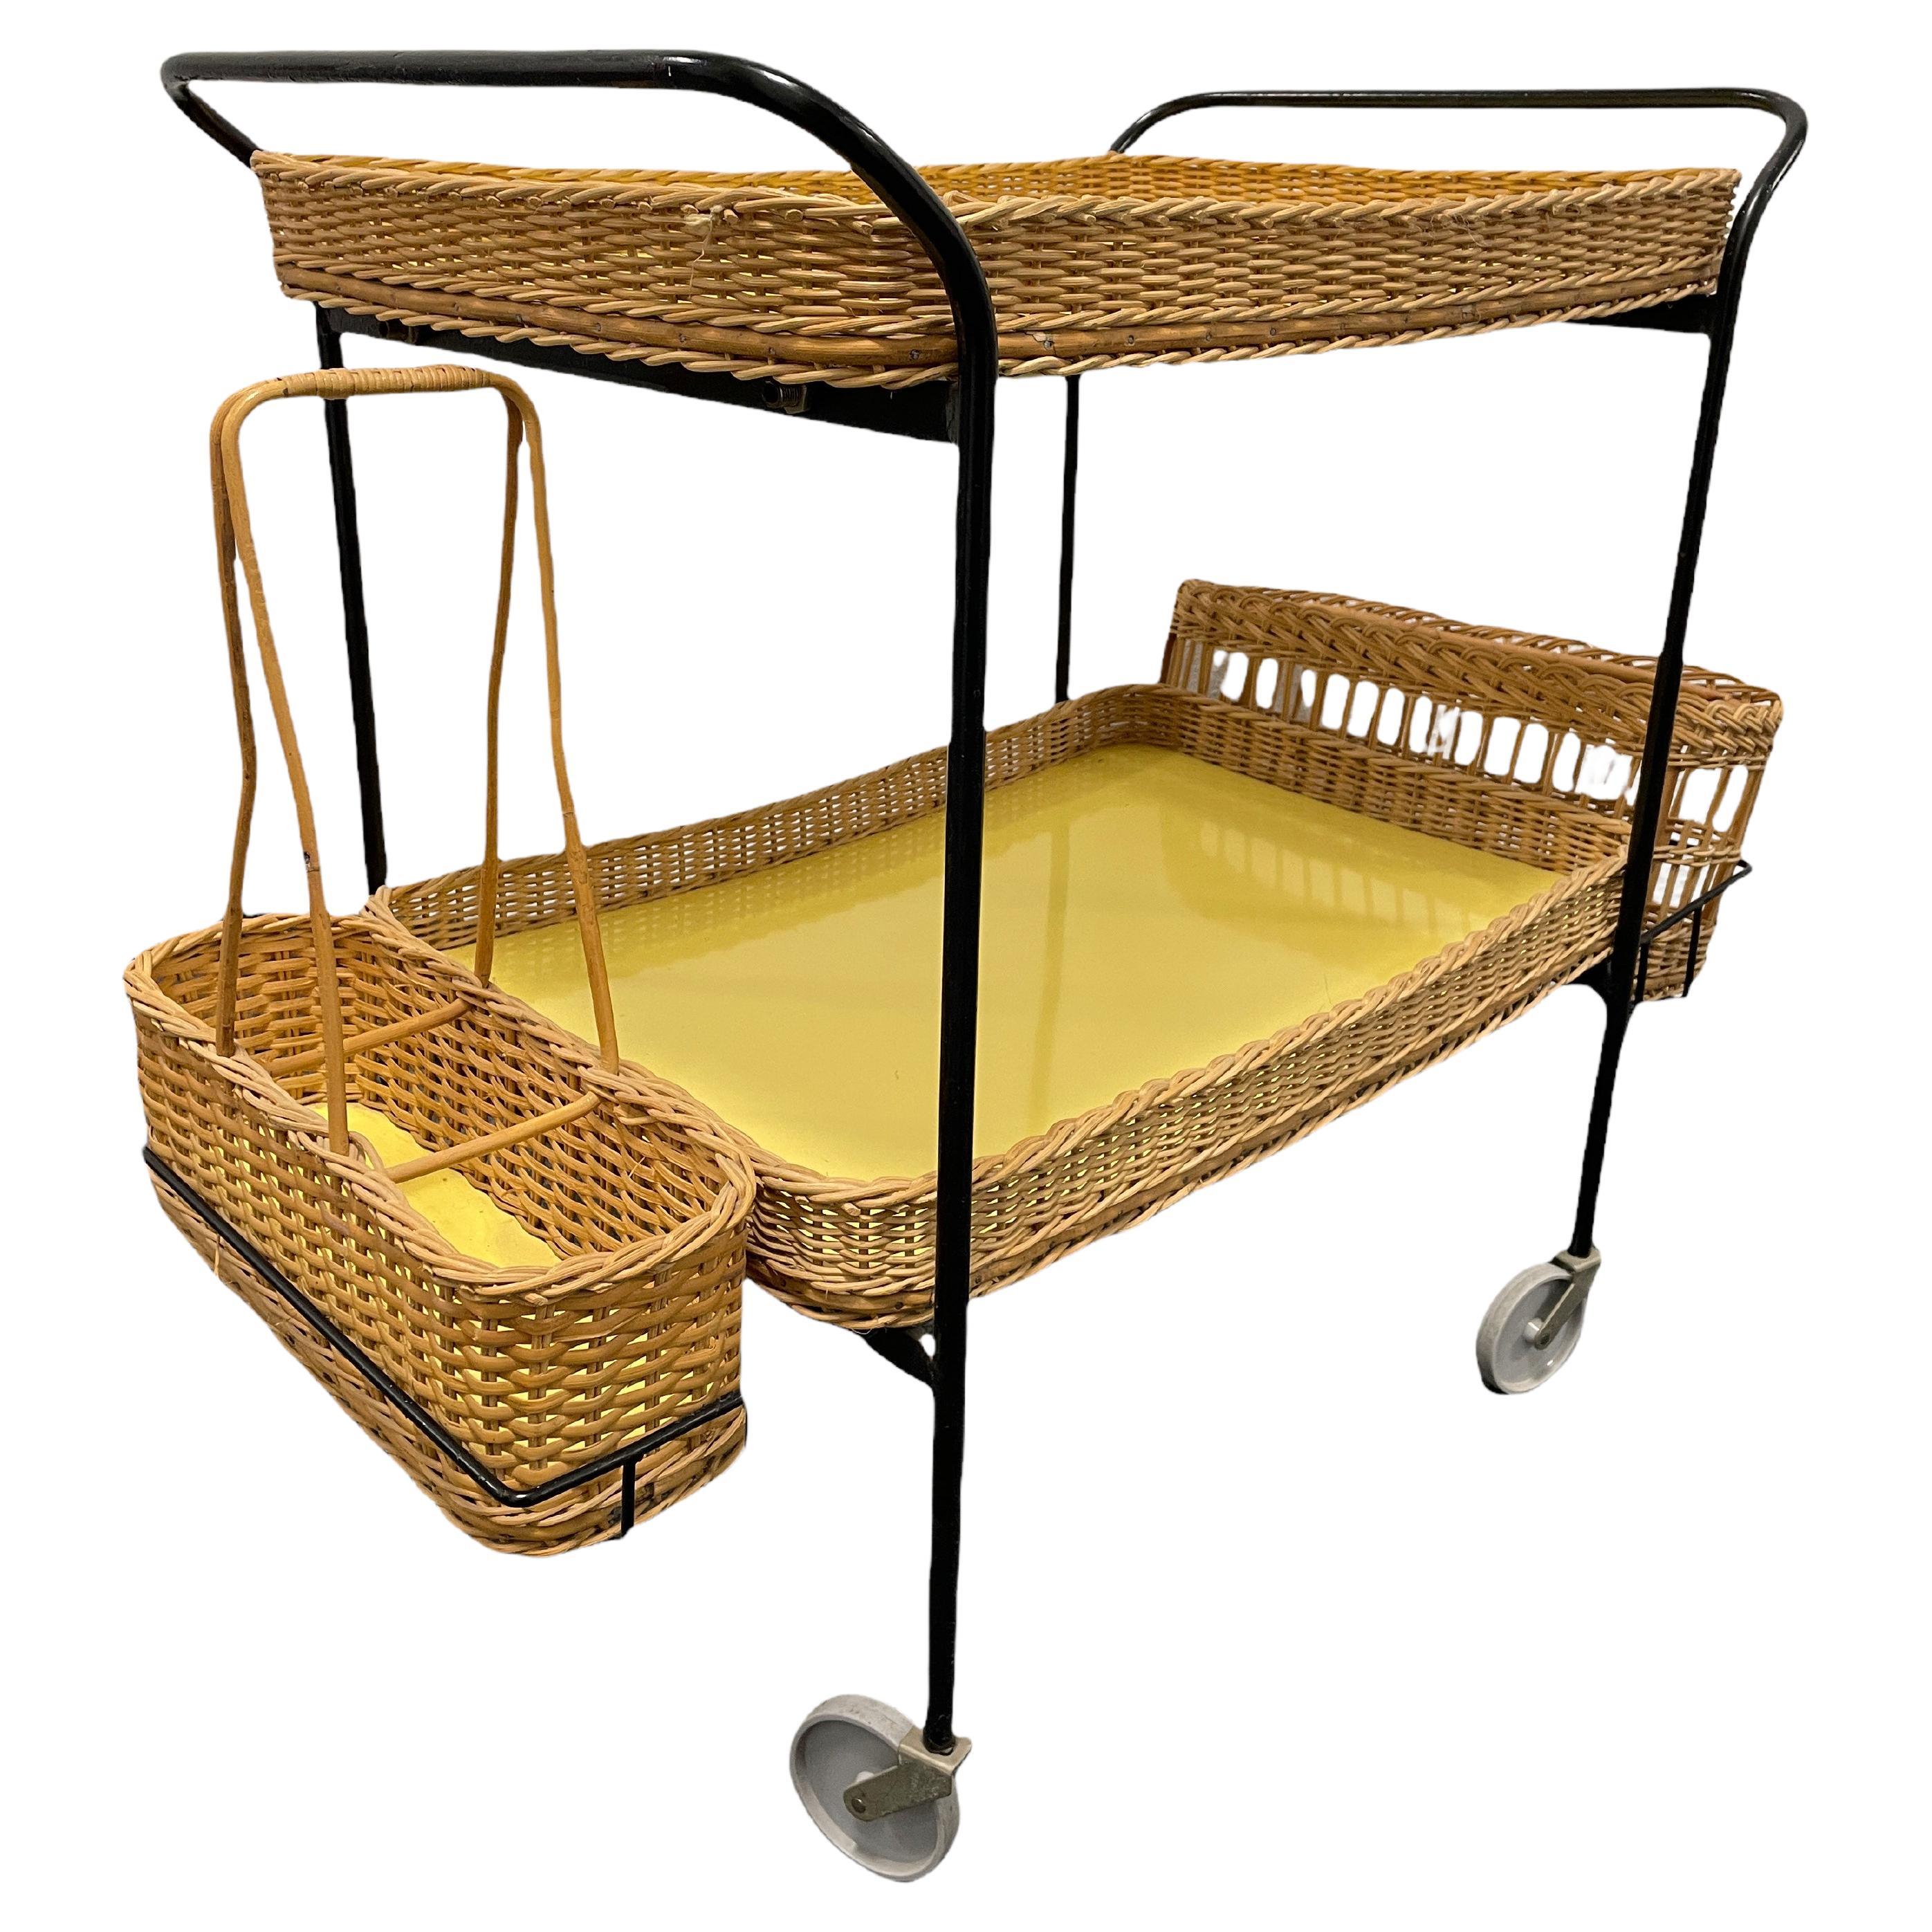 Wicker and Iron Bar Cart or Tea Trolley Table, German, 1950s For Sale